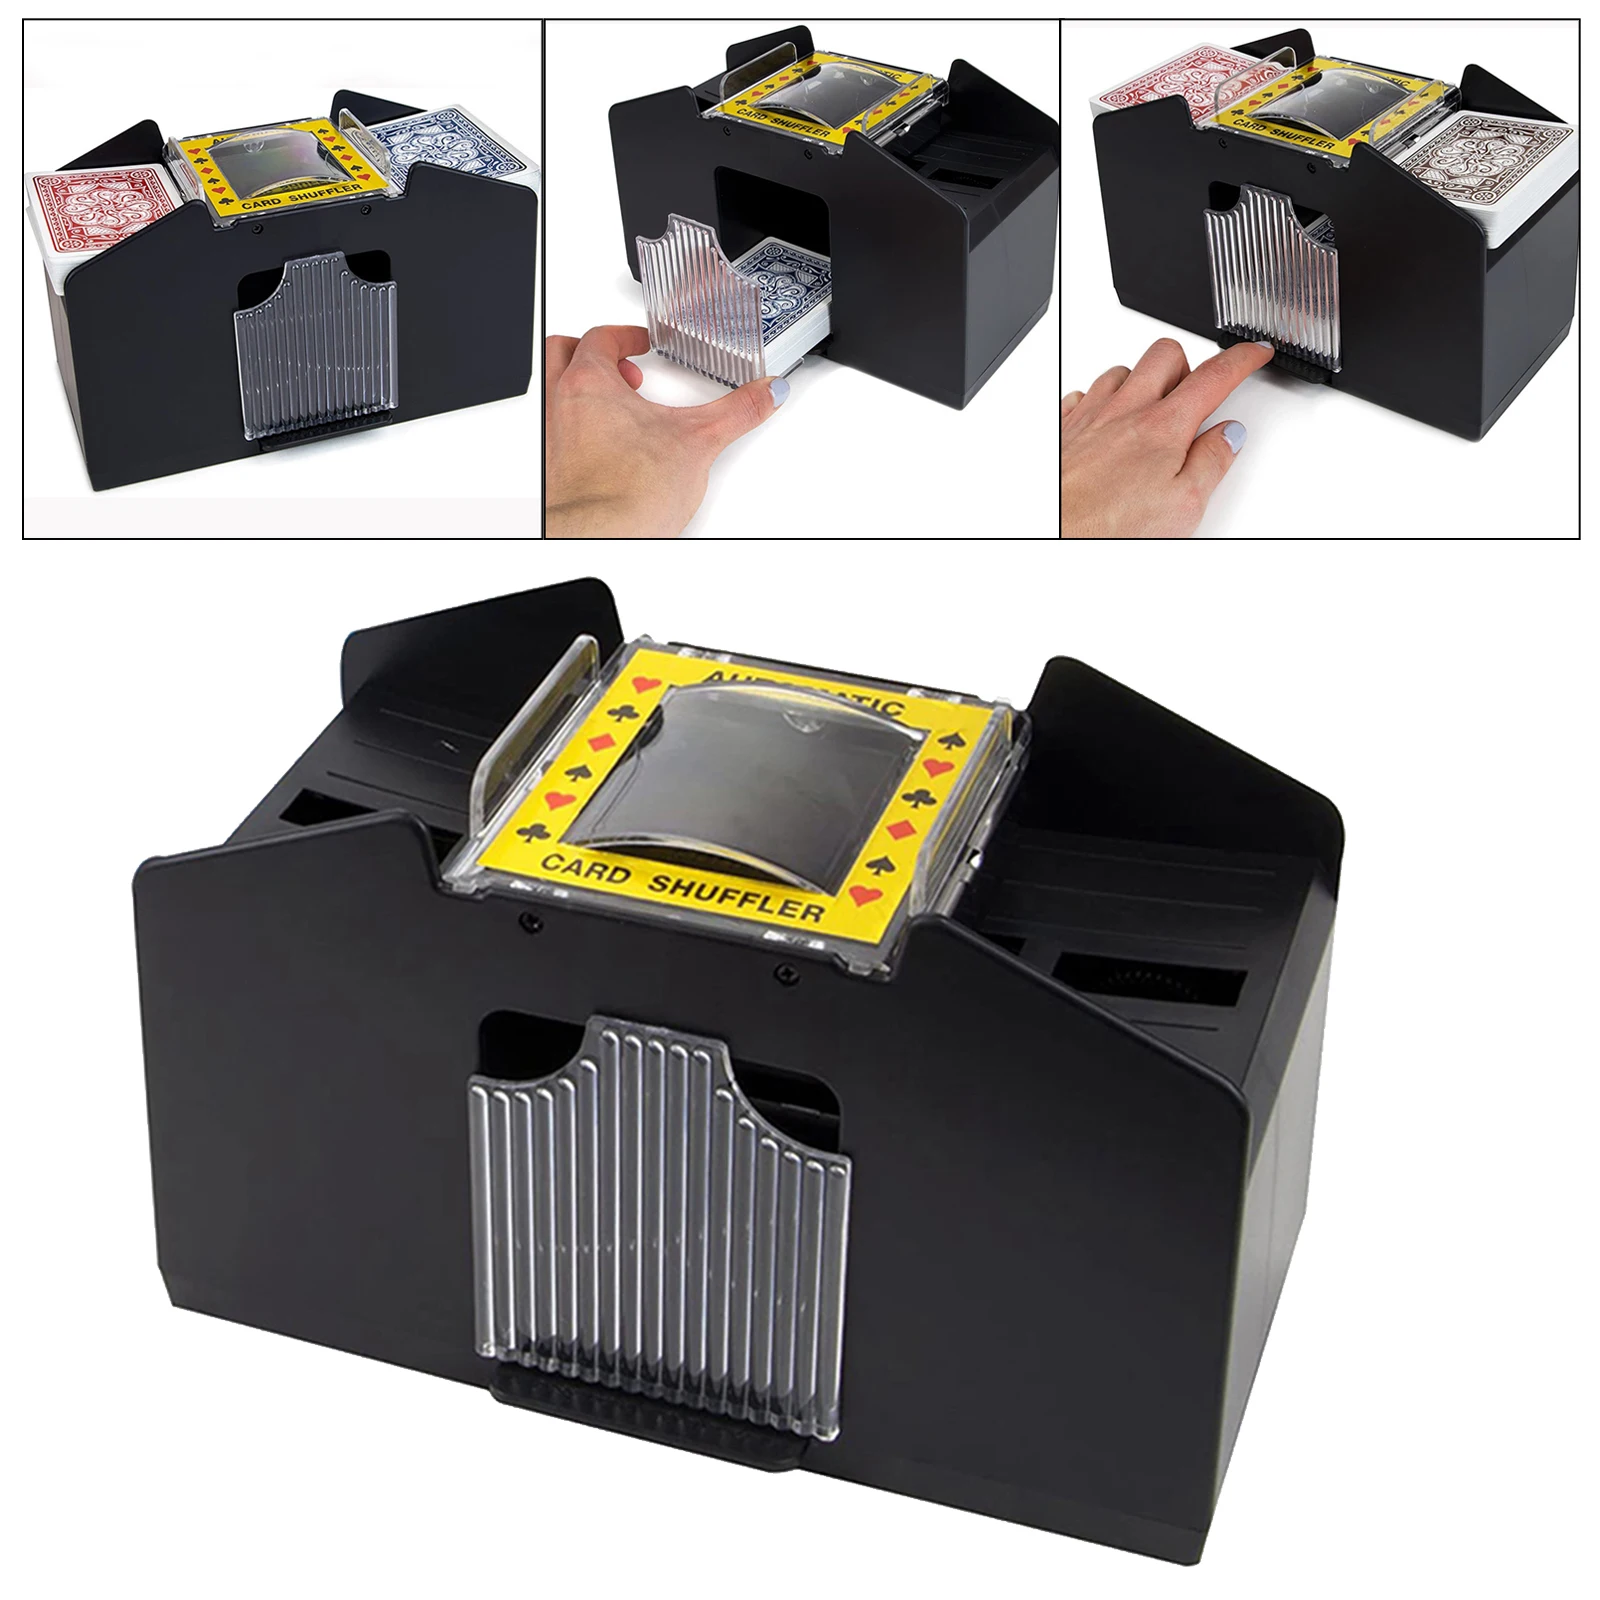 4-Deck Automatic Card Shuffler,Playing Card shuffler Quiet, Easy to Use,Battery Operated